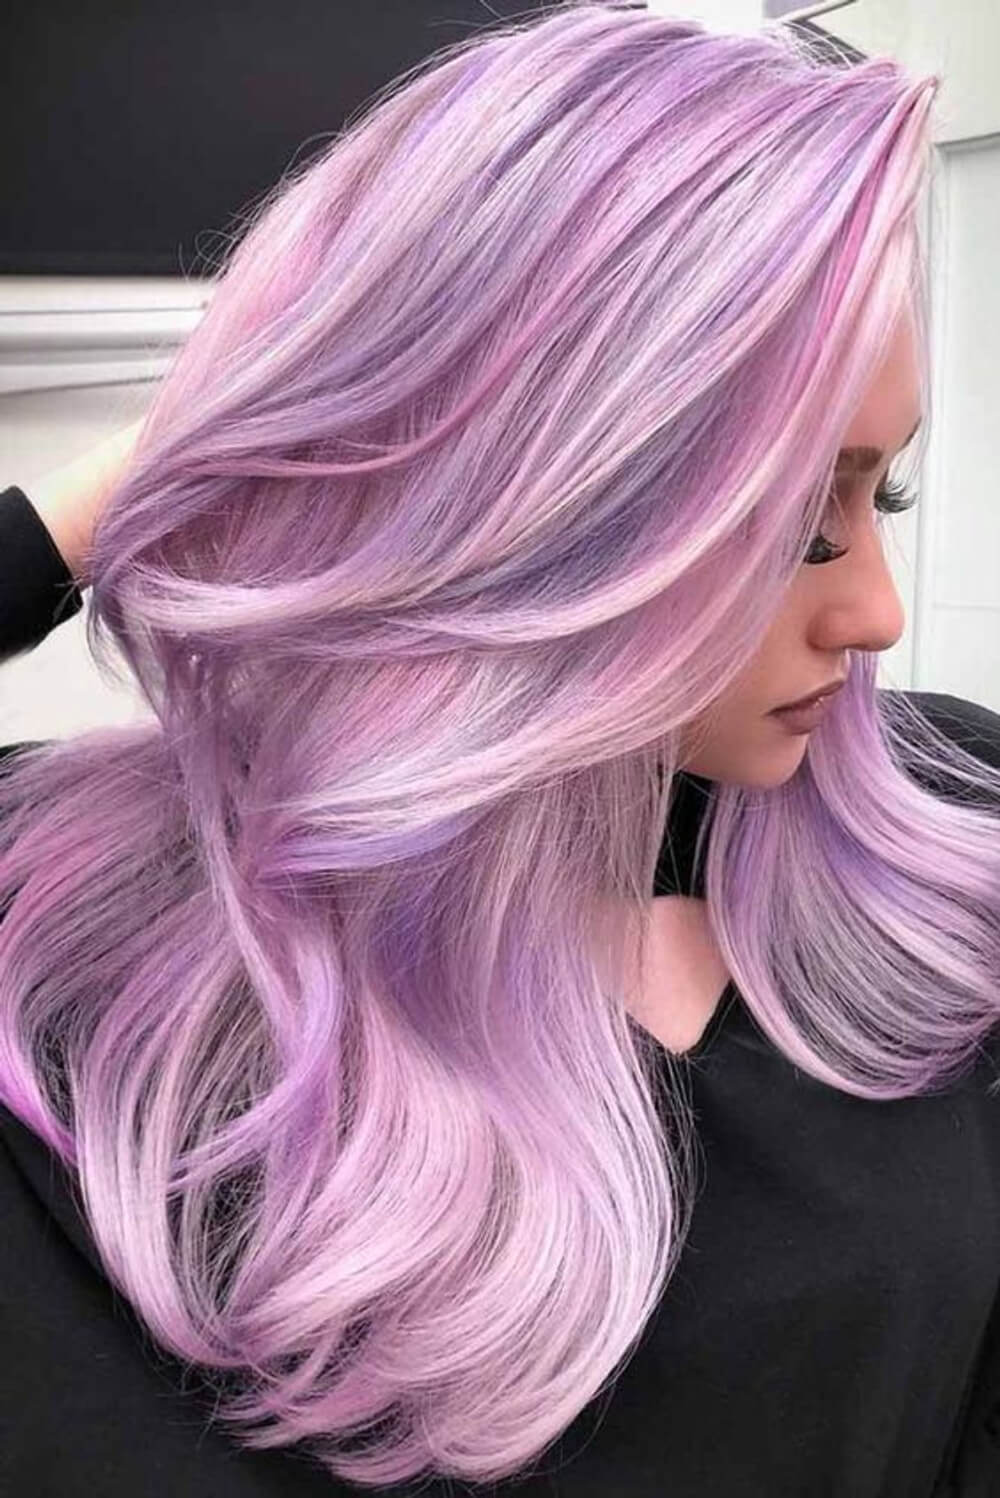 30 Cool Pastel Hair Colors Every Girl Loves - 229